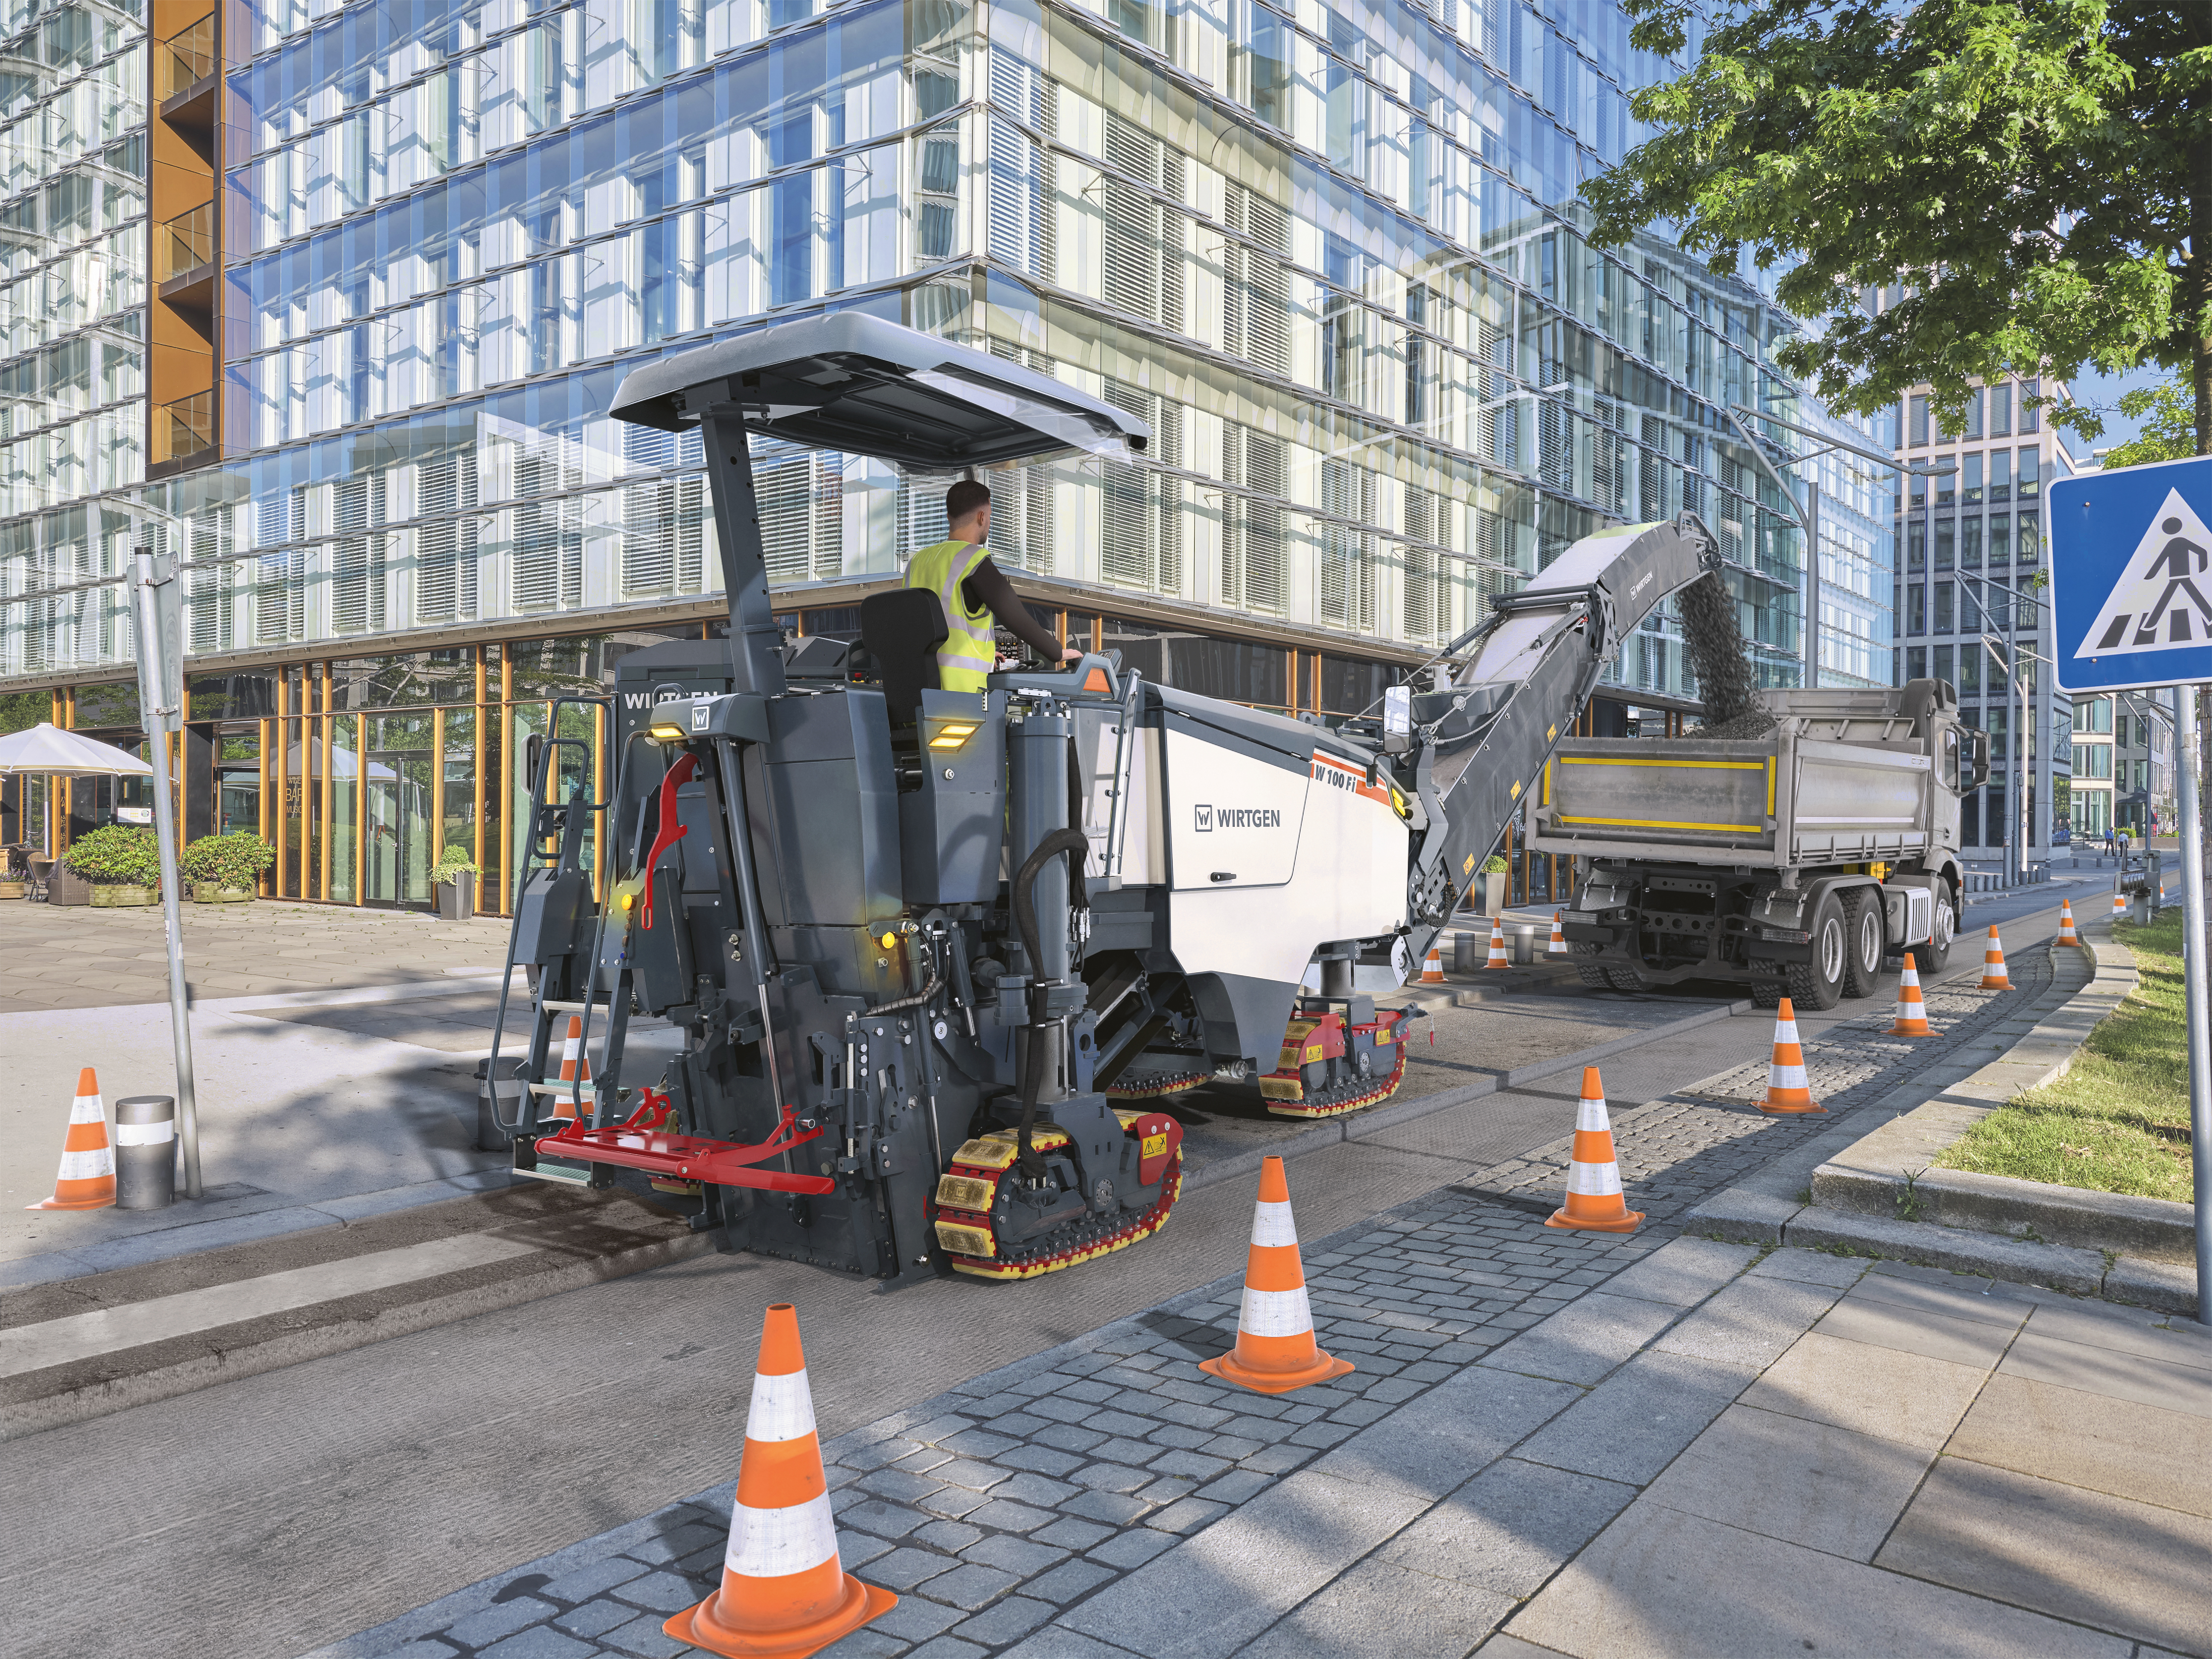 The W 100 Fi, W 120 Fi and W 130 Fi compact milling machines from WIRTGEN deliver impressive performance in a wide range of different applications, for example, for milling off surface layers or when milling tie-ins during road rehabilitation projects.